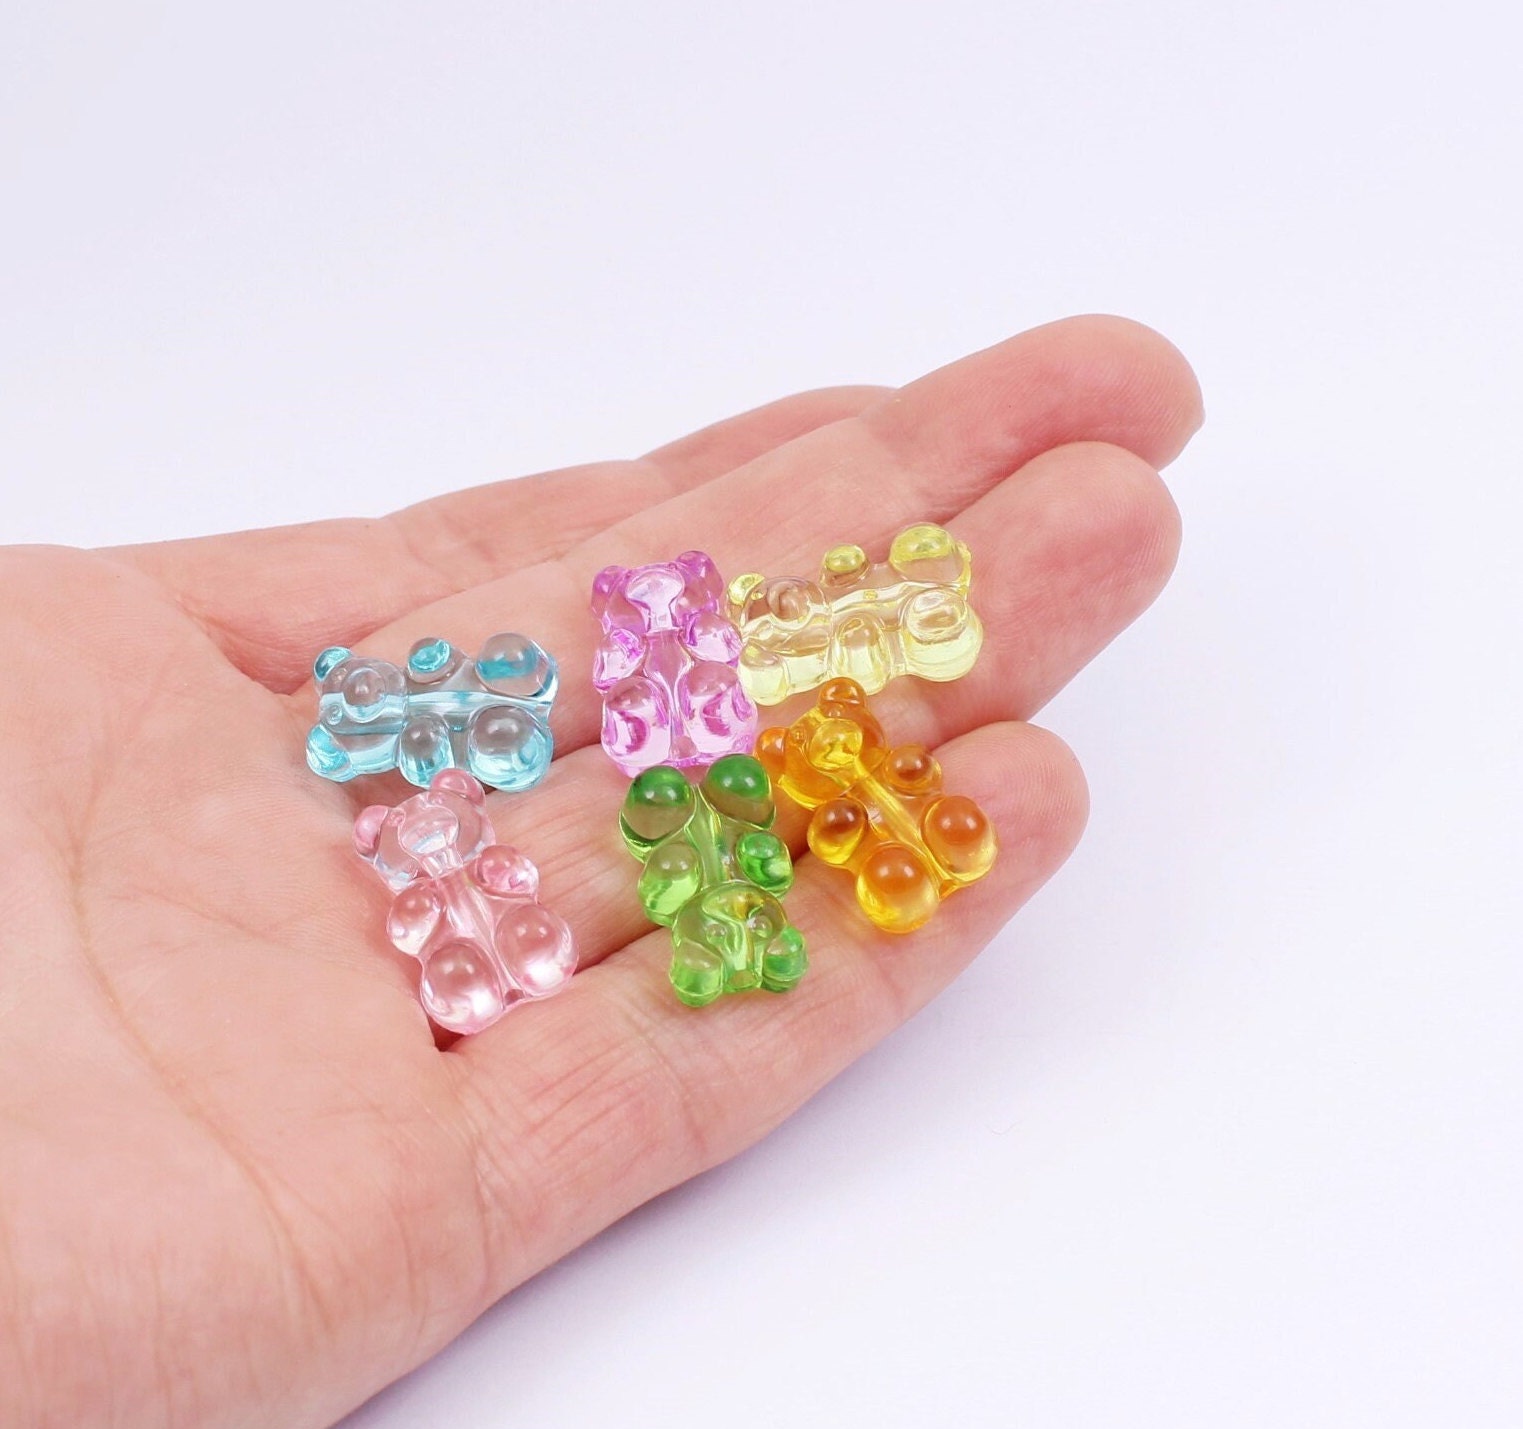 50 Mixed Color Transparent Acrylic Gummy Bear Beads 18mm DIY Earring  Jewelry